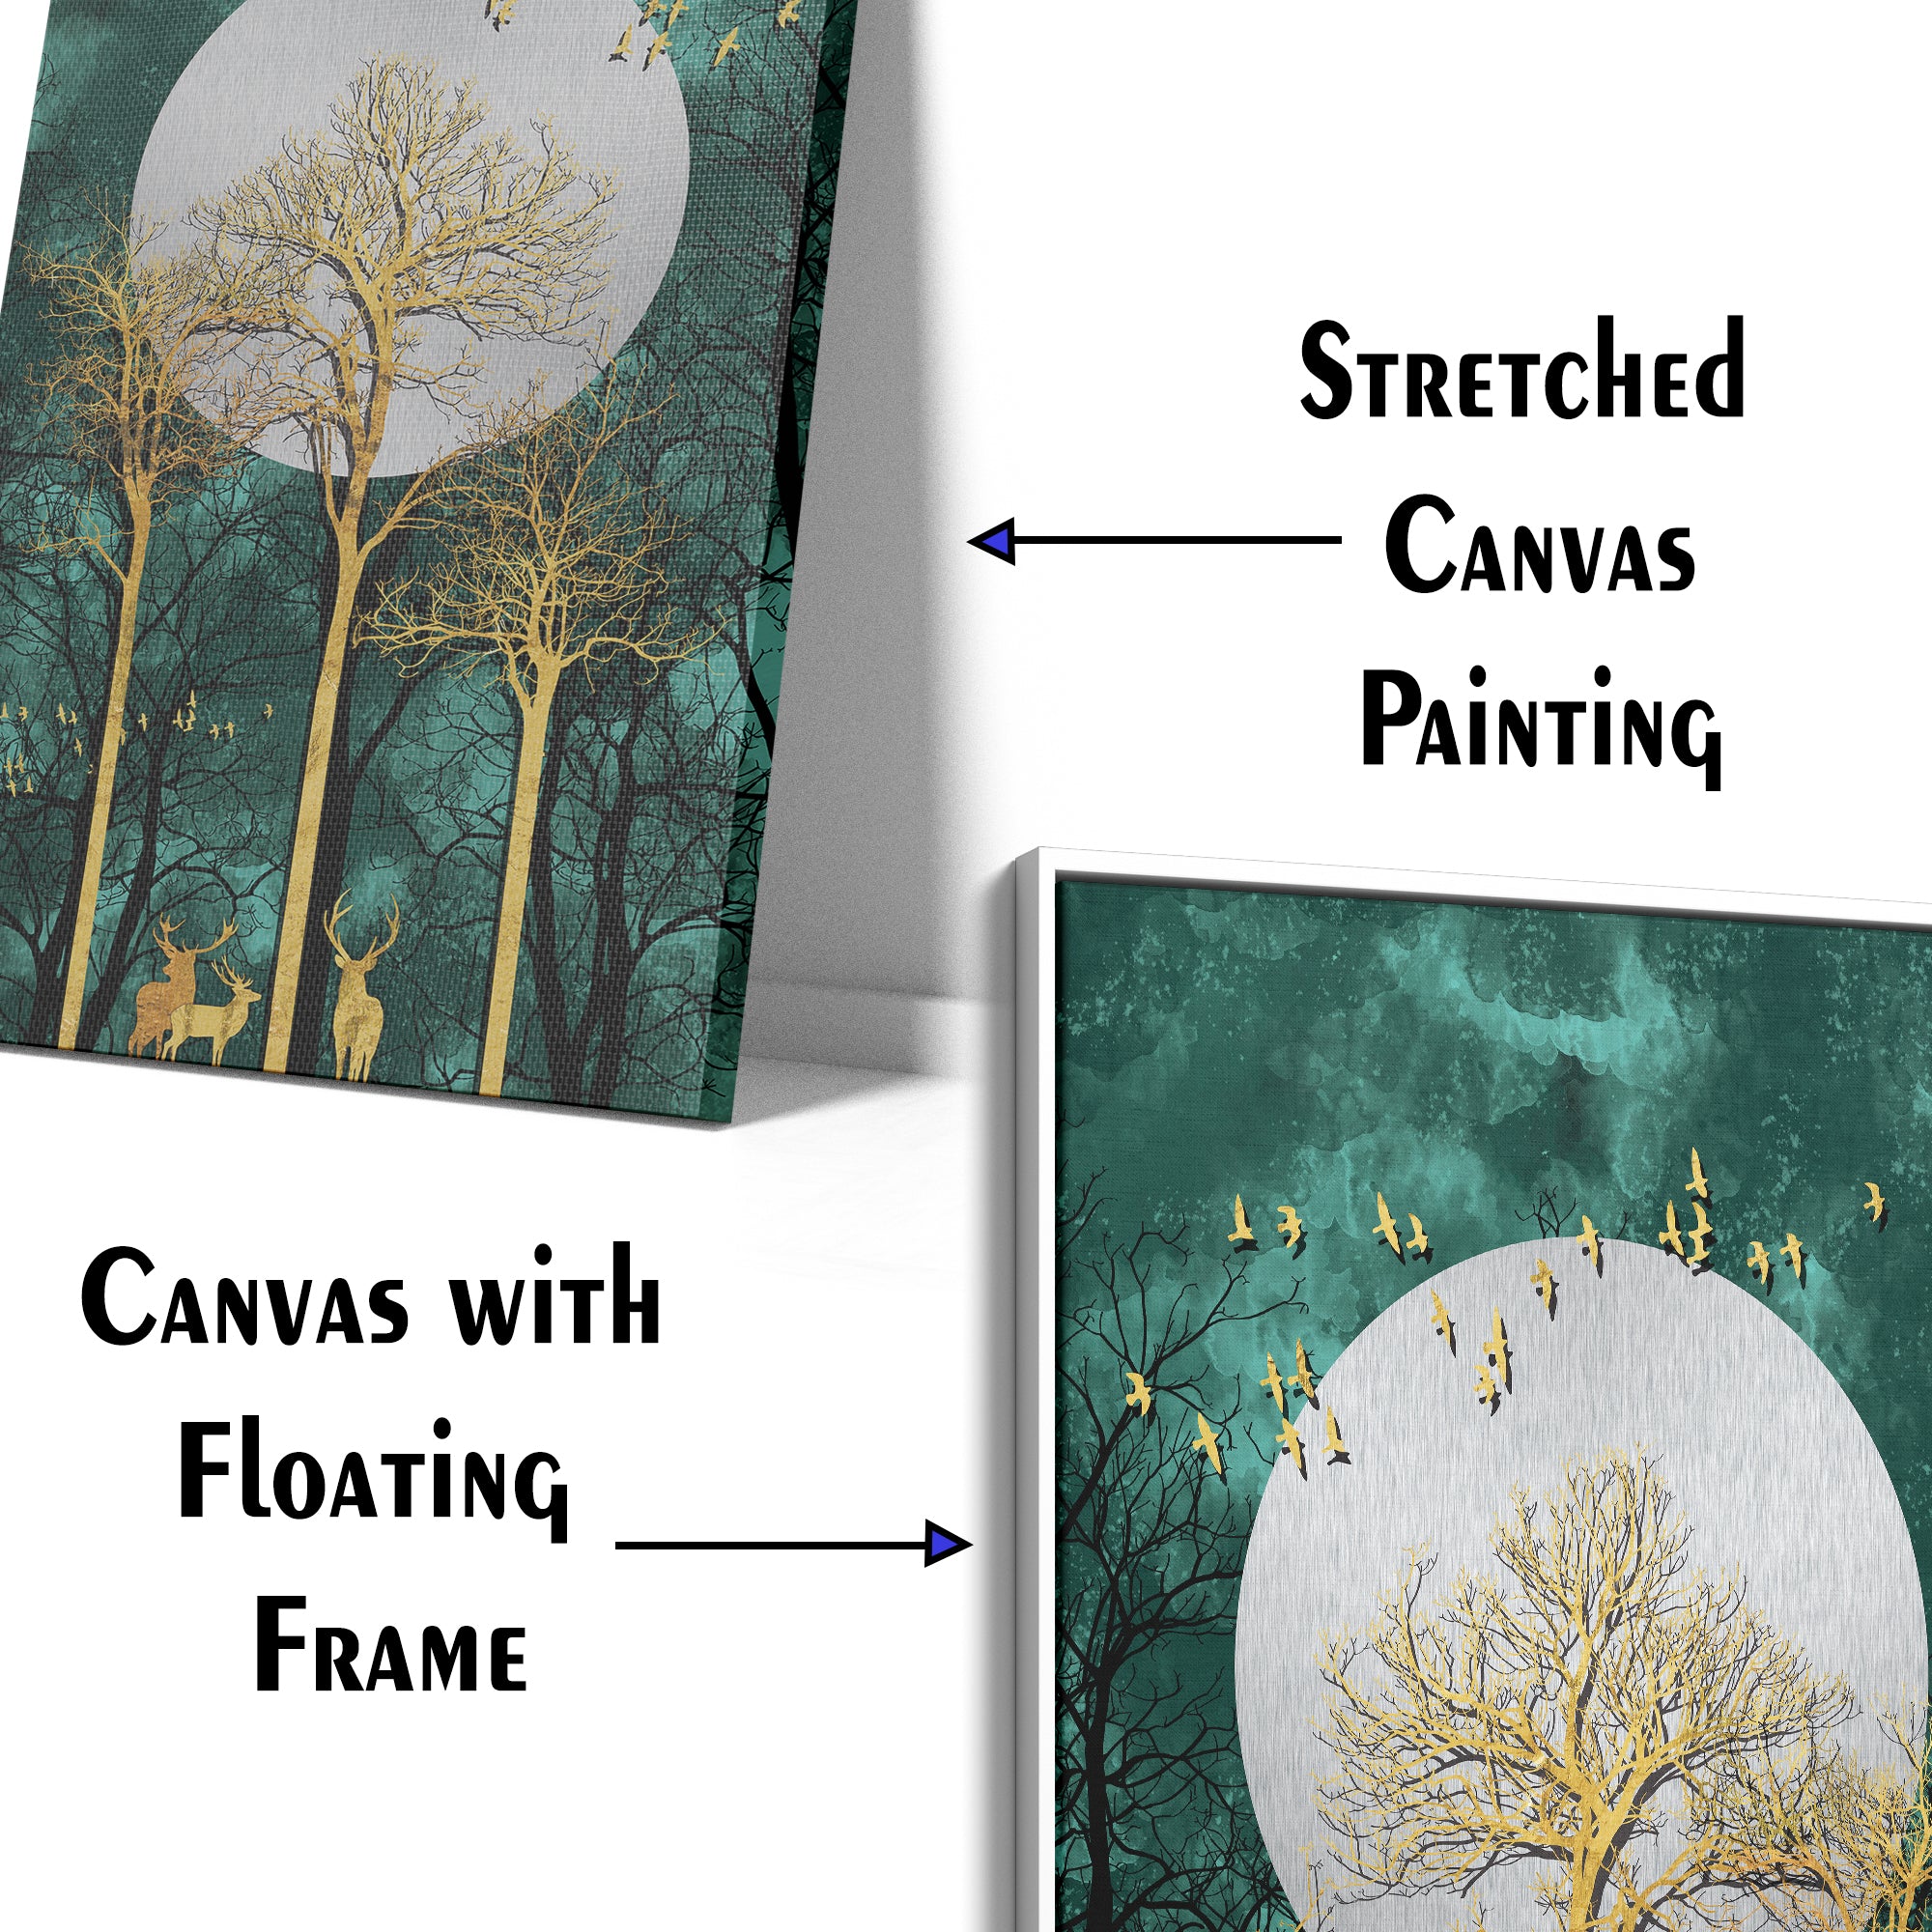 Golden Tree And Deer And Golden Birds With Moon Canvas Wall Painting